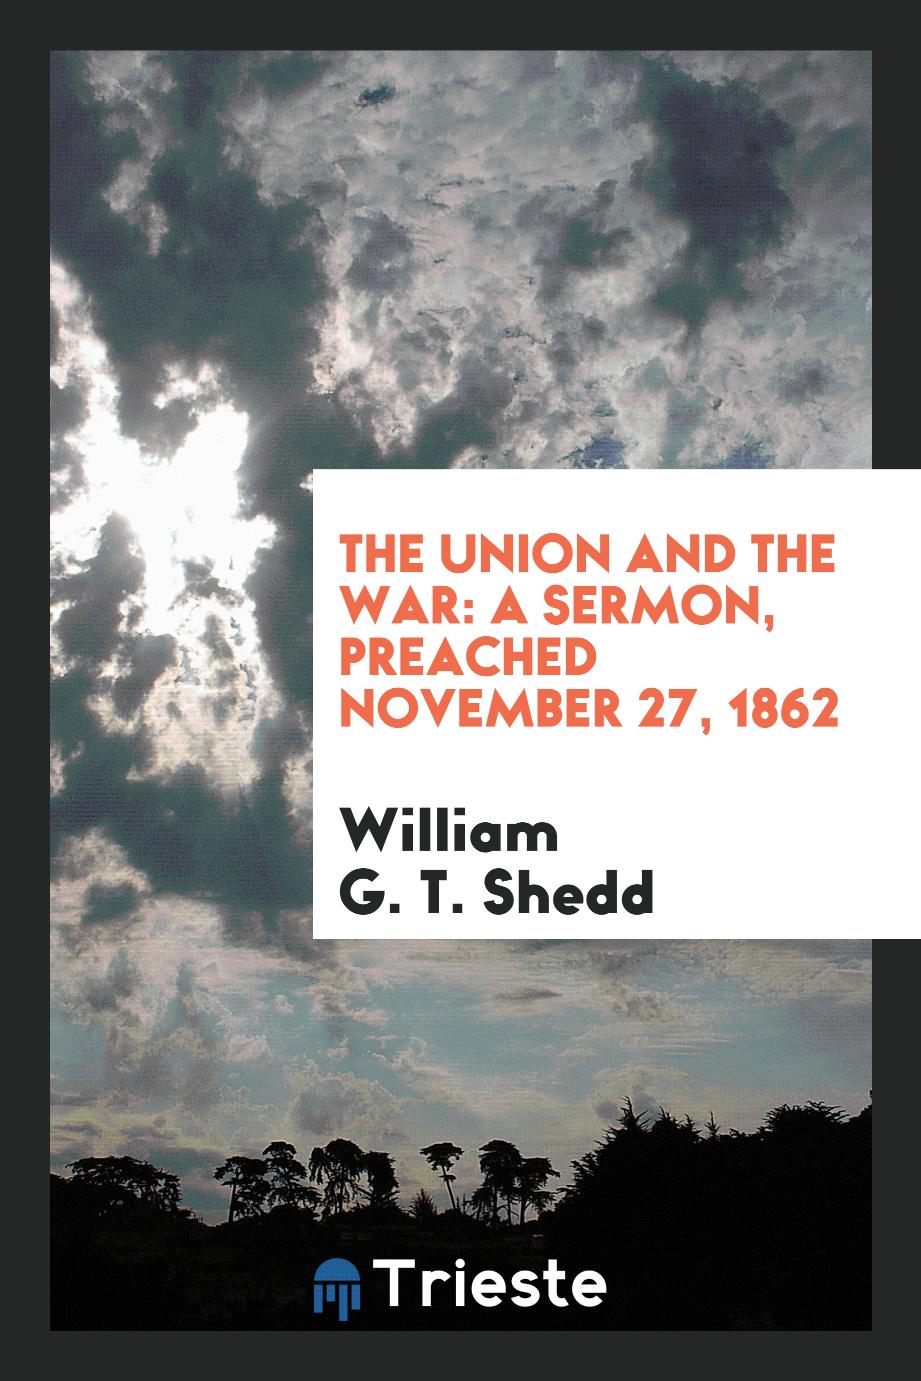 The Union and the war: a sermon, preached November 27, 1862